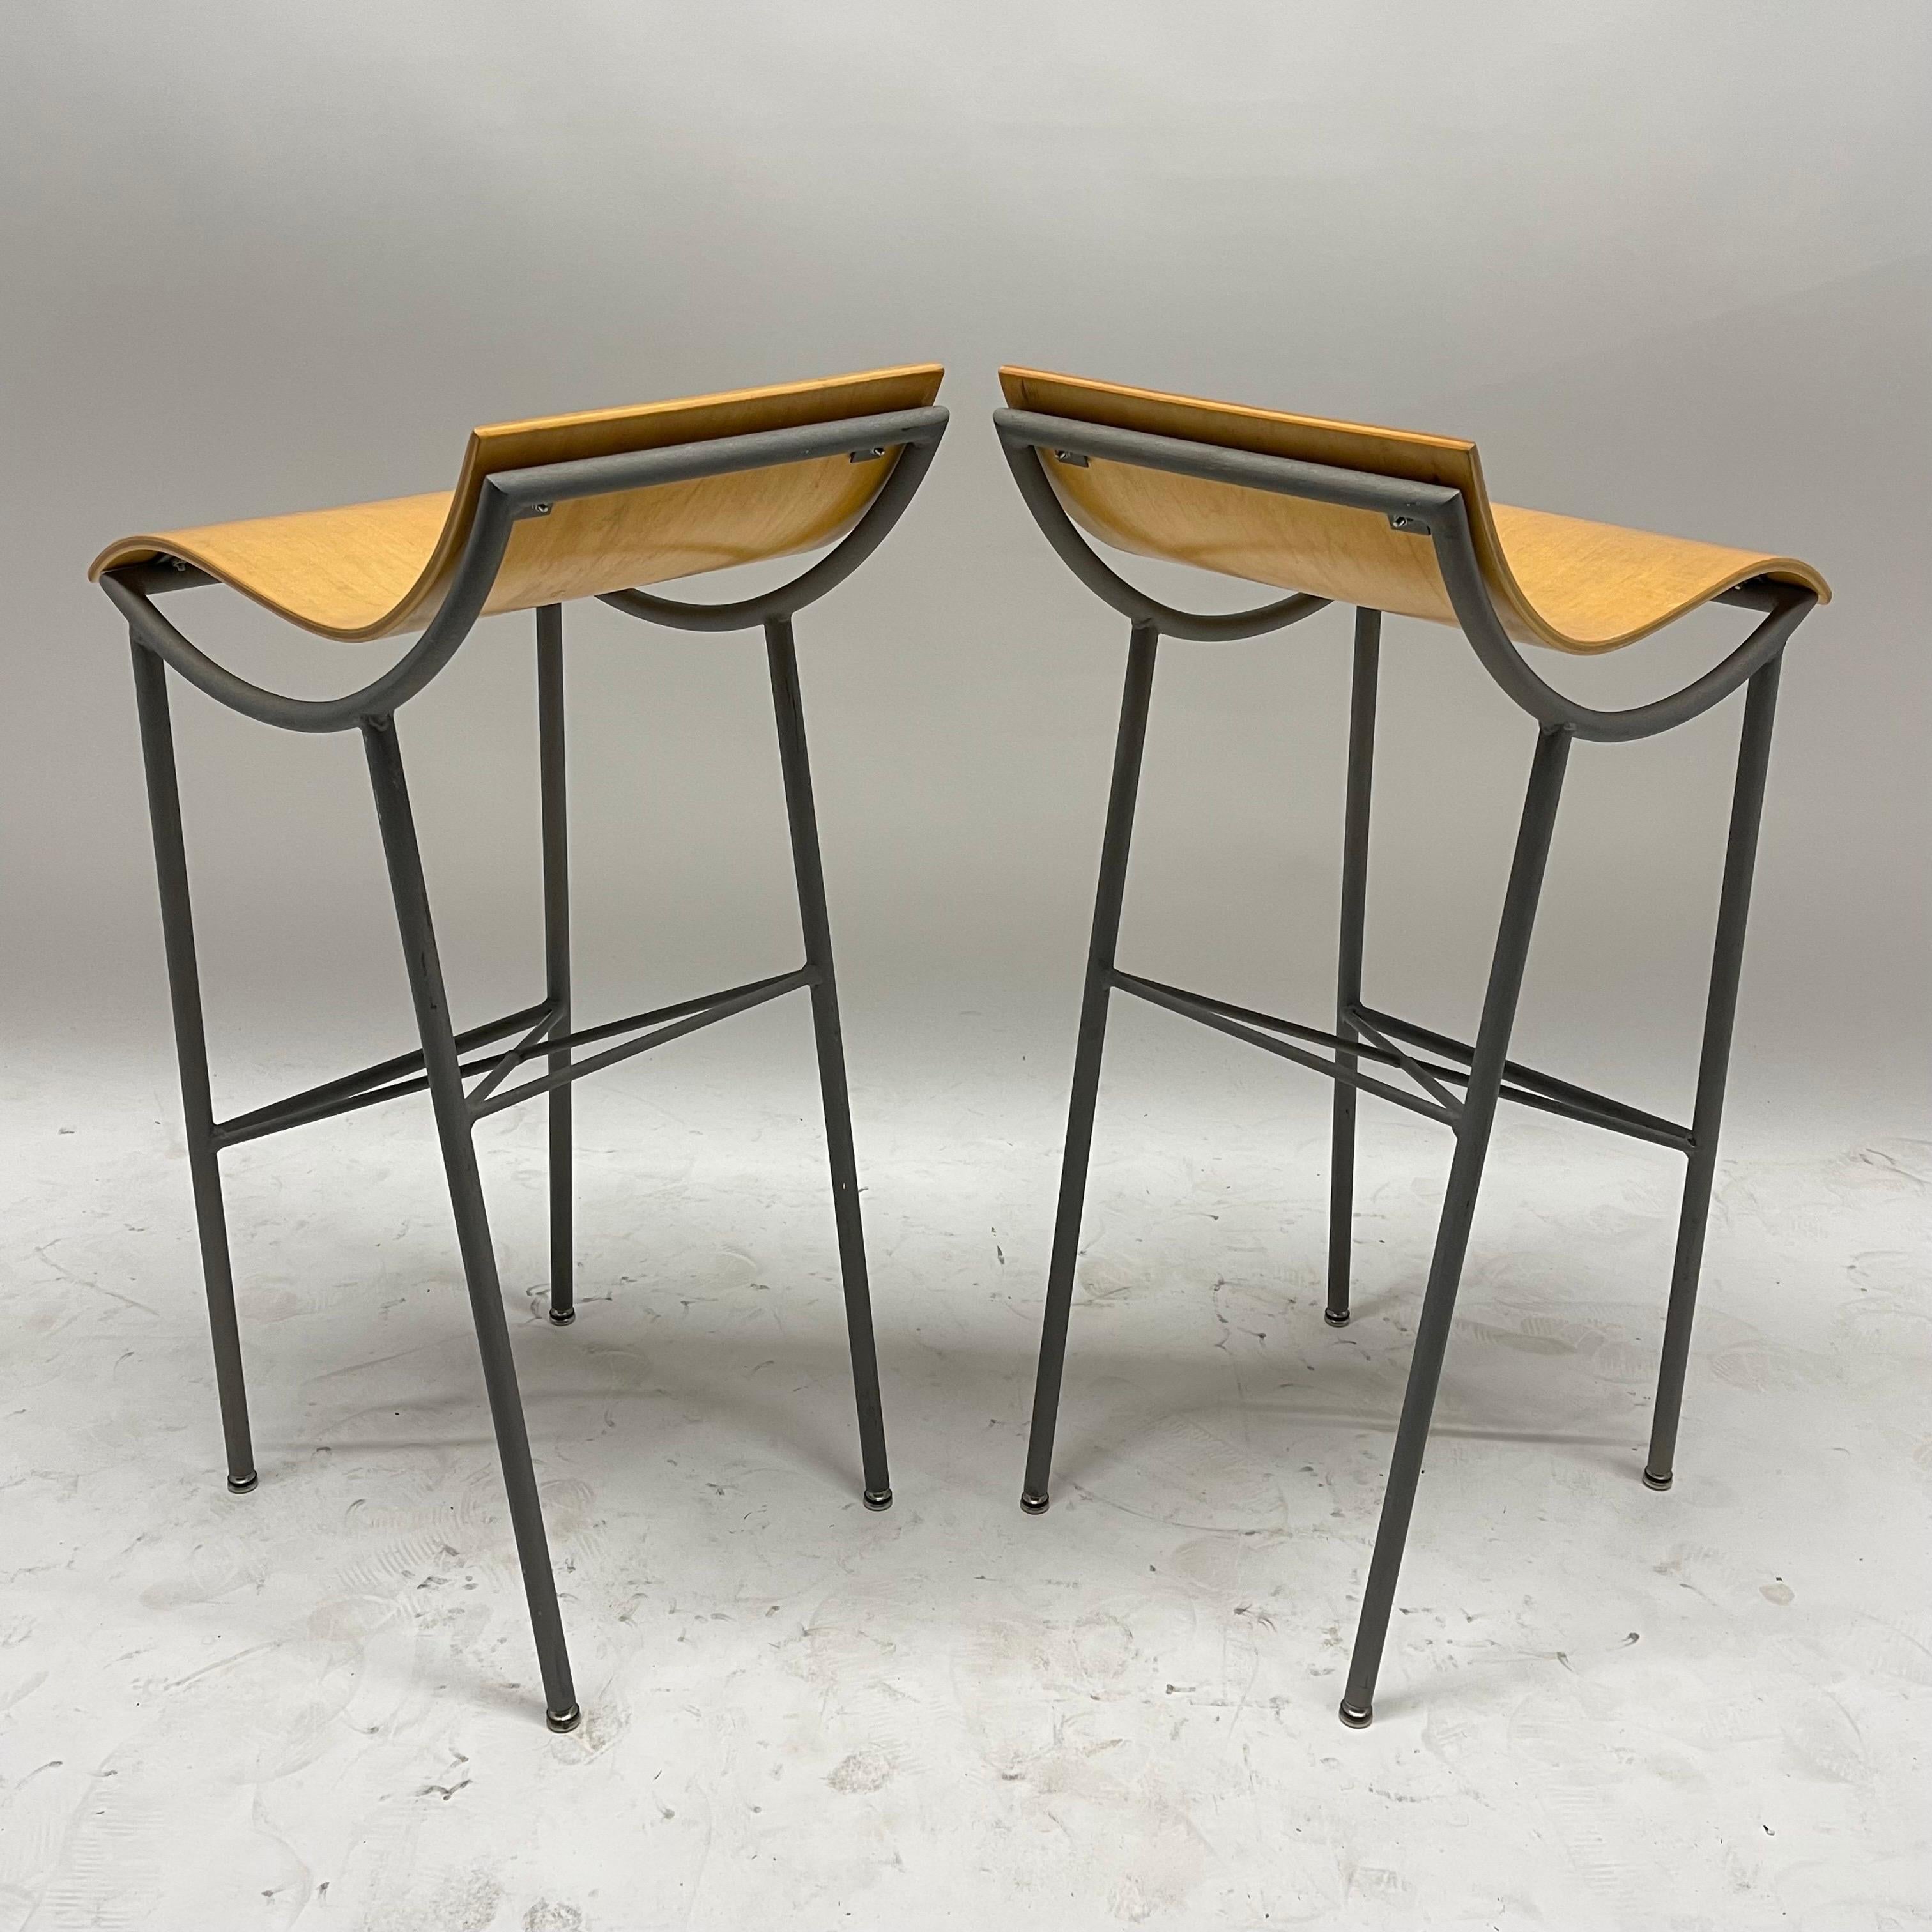 Welded Pair of Post Modern Sculptural Steel and Bent Plywood Bar Stools, circa 1980s For Sale